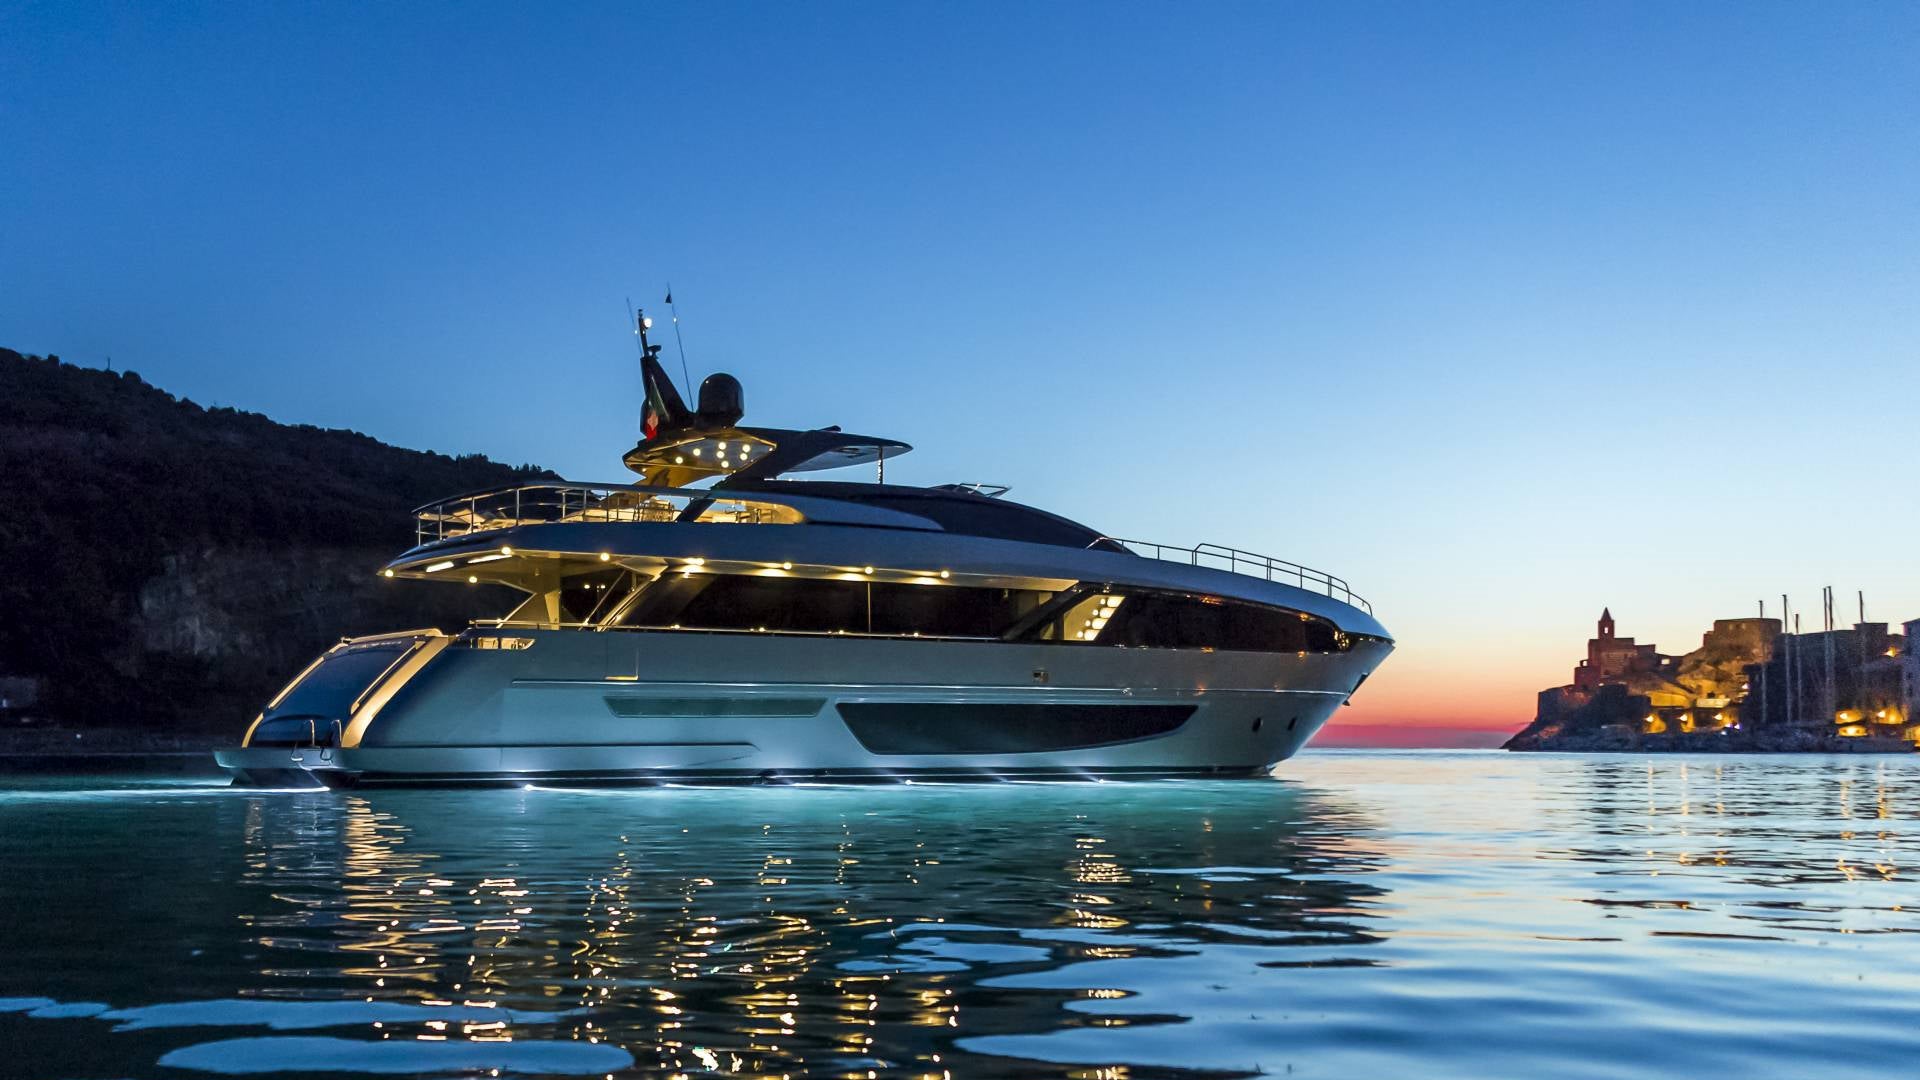 The Royal Treatment: French Riviera Luxury Yacht Charters